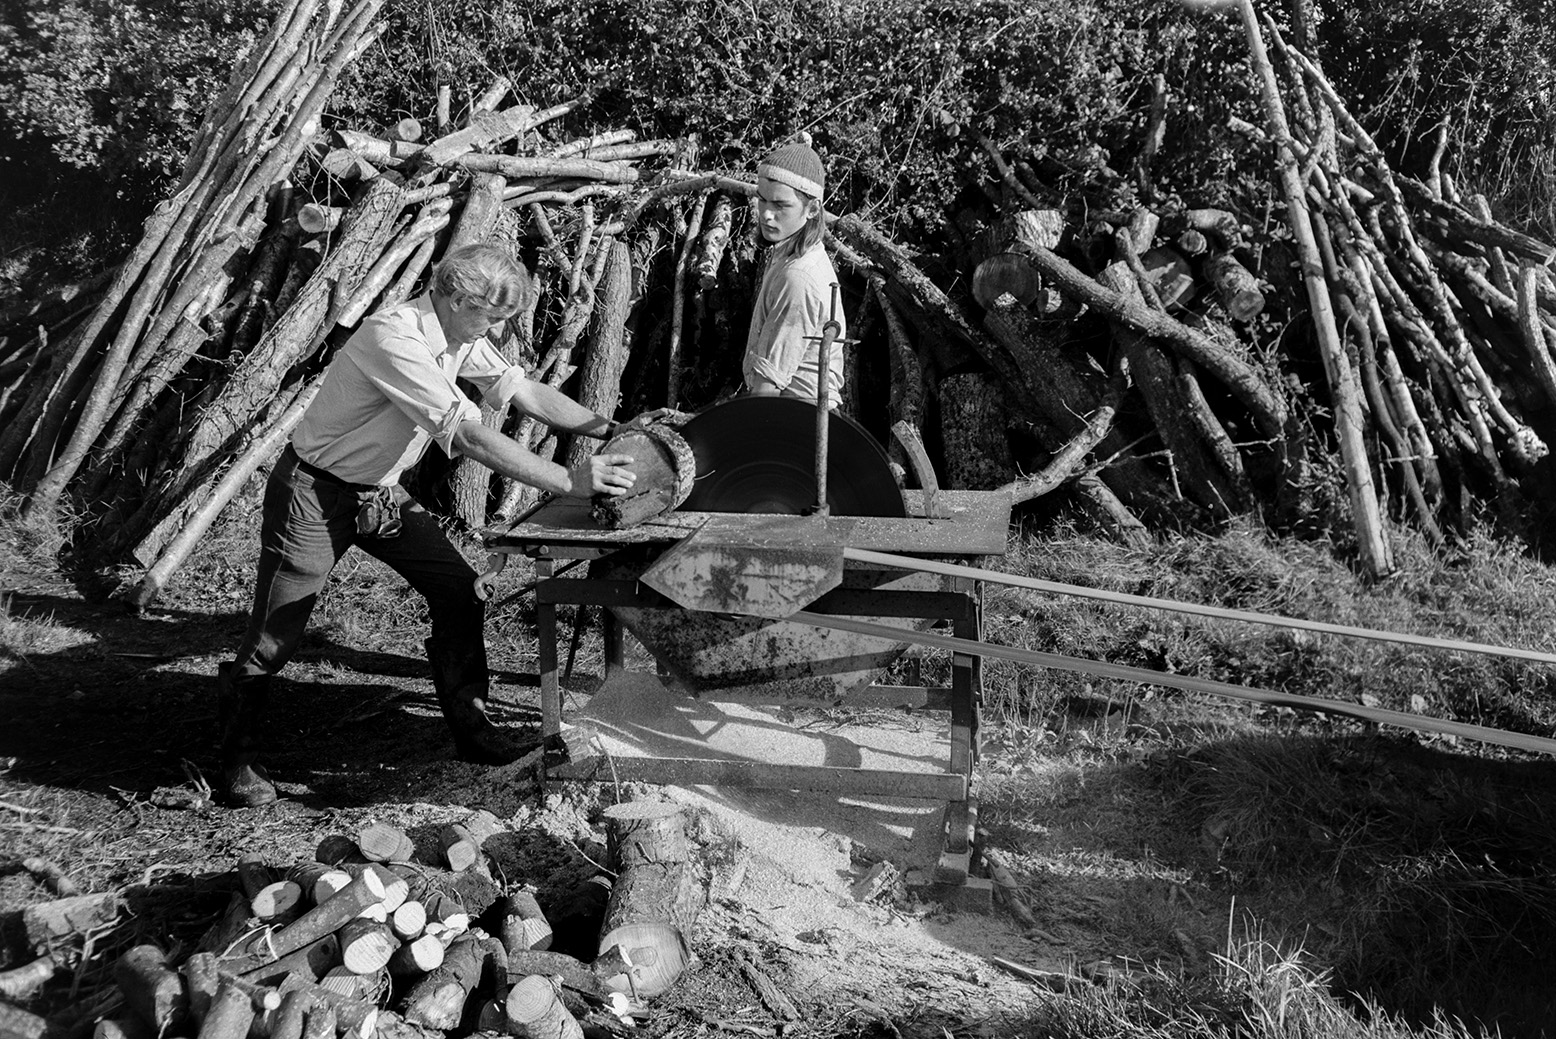 Derek Bright, on the right, helping Ivor Bourne saw logs with a circular saw, in a field at Mill Road Farm, Beaford. A log pile is resting against the hedge in the background, waiting to be sawn.  The farm was also known as Jeffrys.